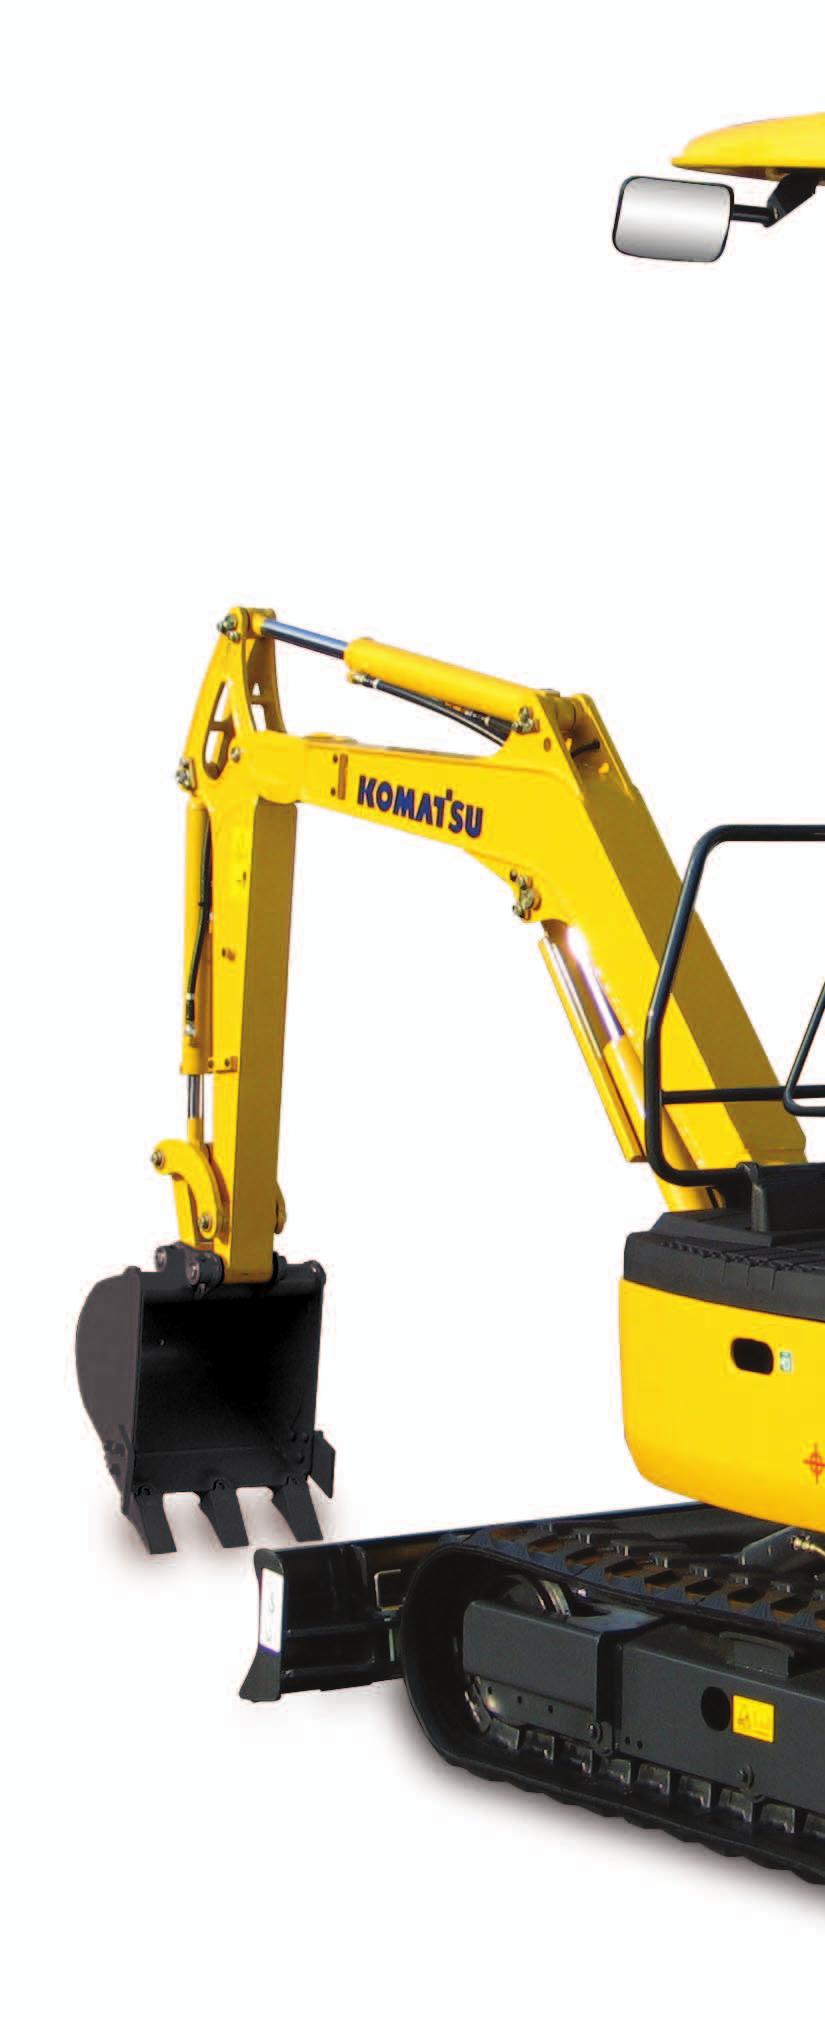 PC18MR-3 C OMPACT H YDRAULIC E XCAVATOR WALK-AROUND Performance and Versatility Standard auxiliary hydraulics Two track options: rubber, steel Automatic two-speed travel ISO/SAE pattern change valve